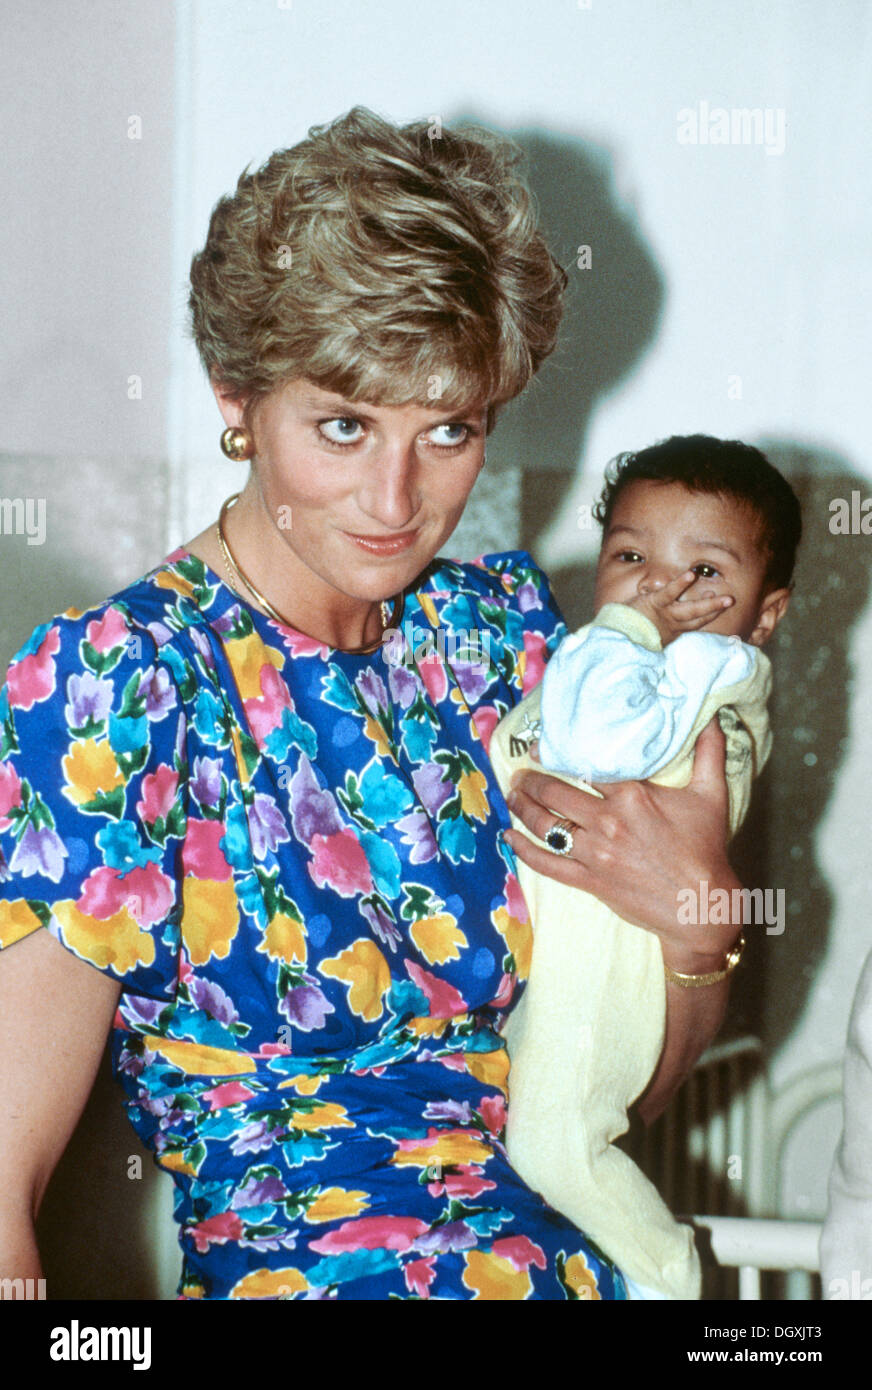 HRH Diana, Princess of Wales with a child affected with HIV AIDS during a visit to an orphanage, Sao Paulo, Brazil April 1991 Stock Photo